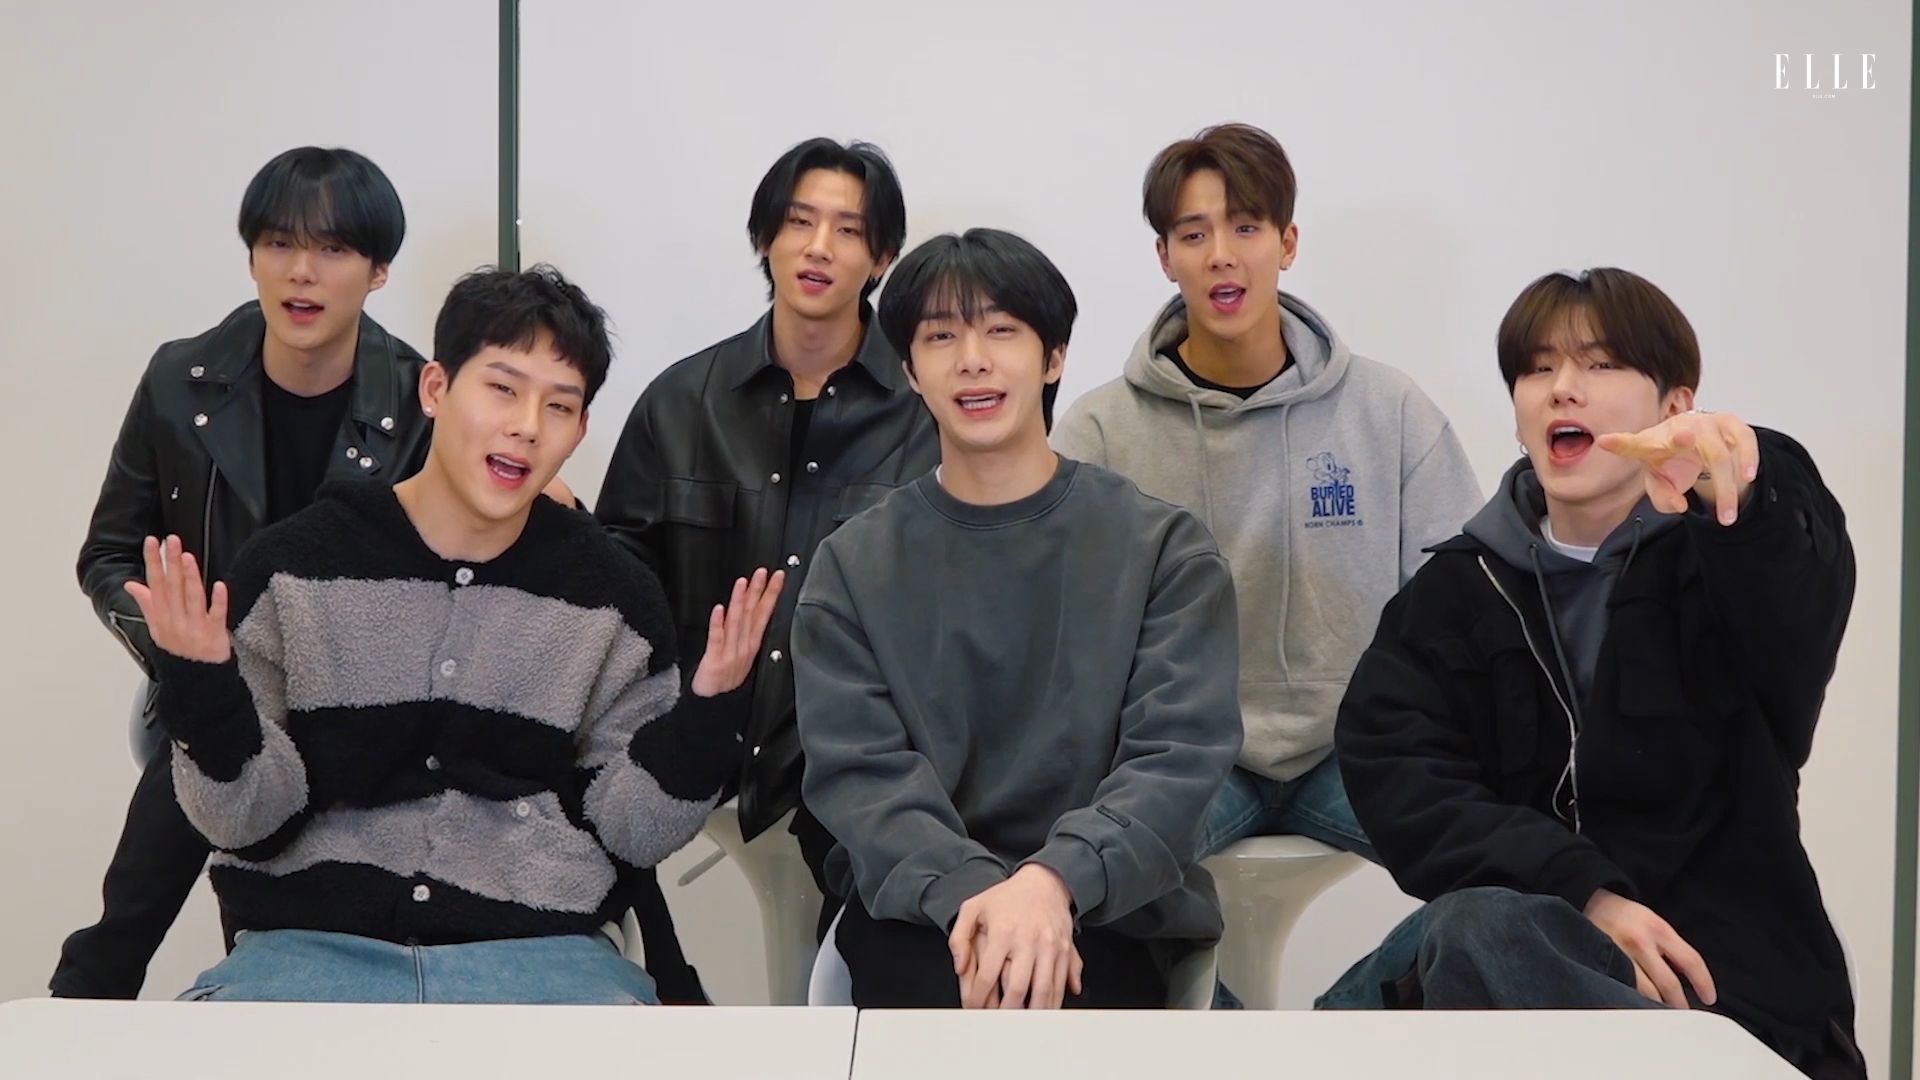 Watch MONSTA X Play a Second Game of Song Association